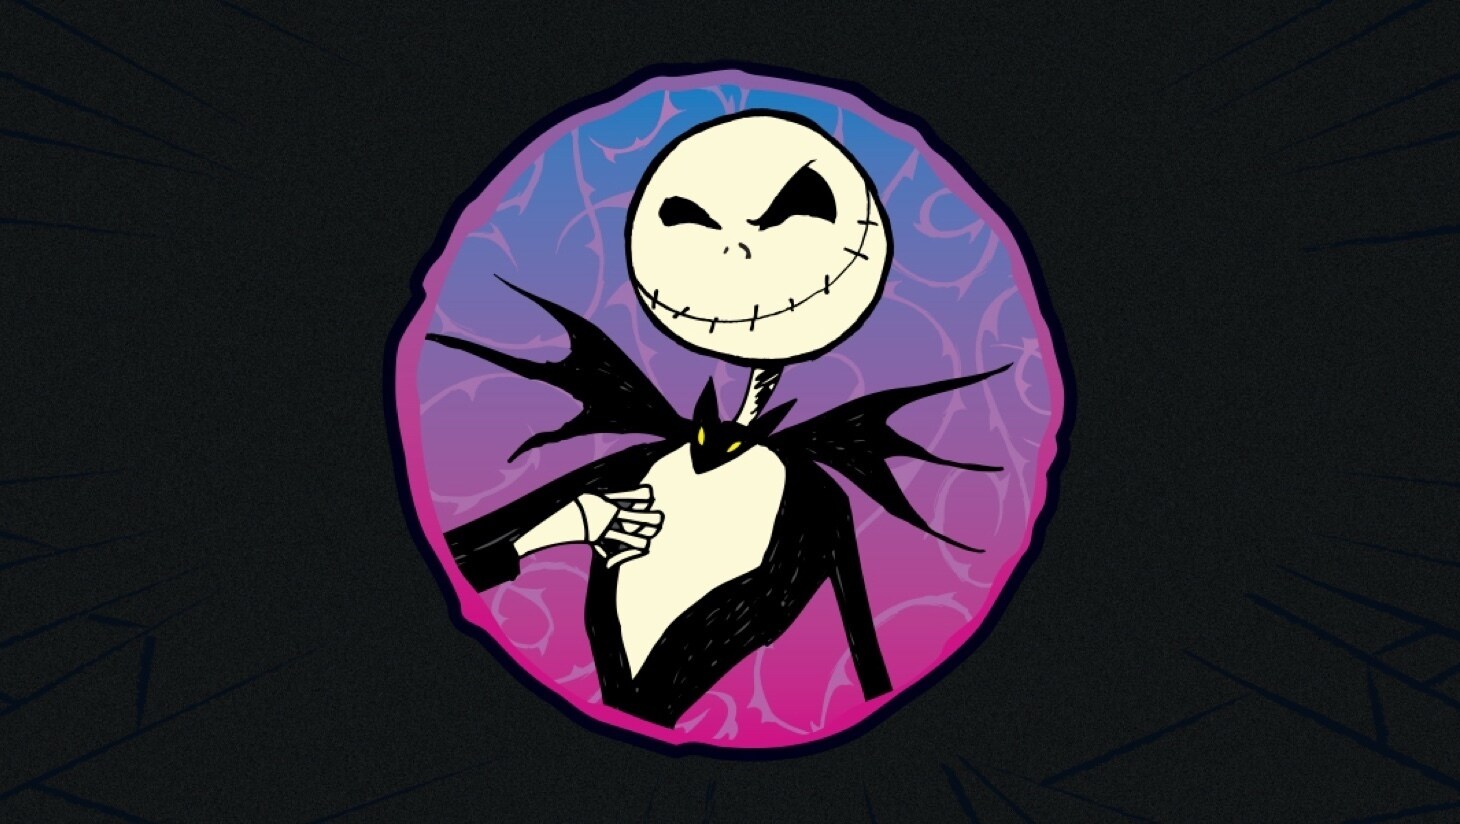 An illustrated Jack Skellington portrait on a purple background with spiderweb decorations